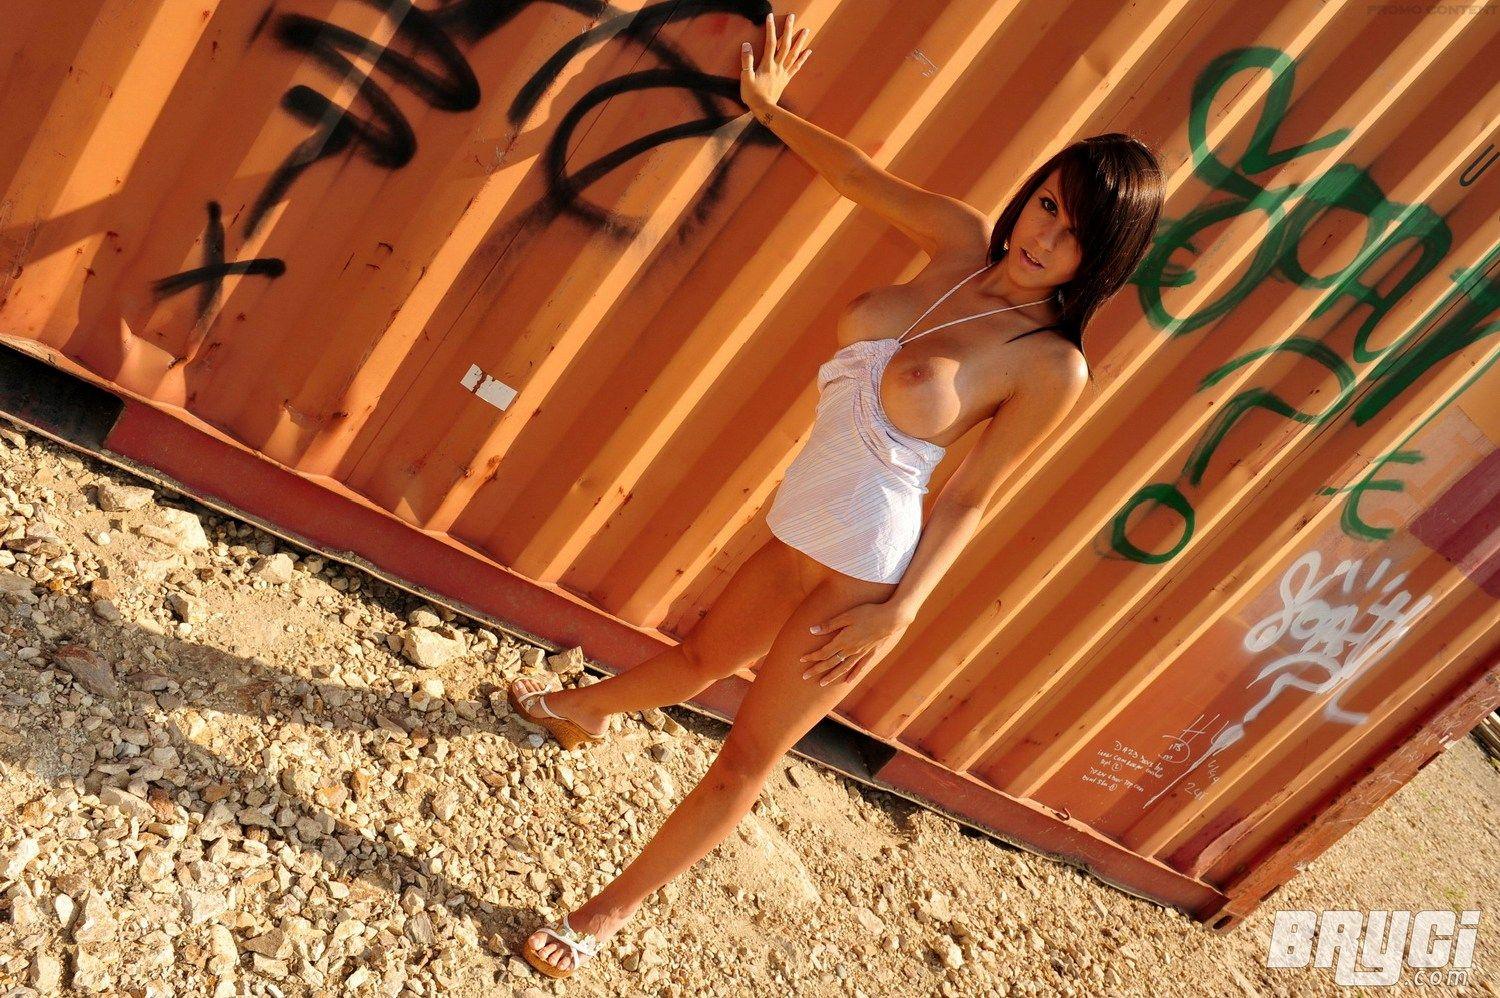 Pictures of Bryci exposing herself by a train car #53578306